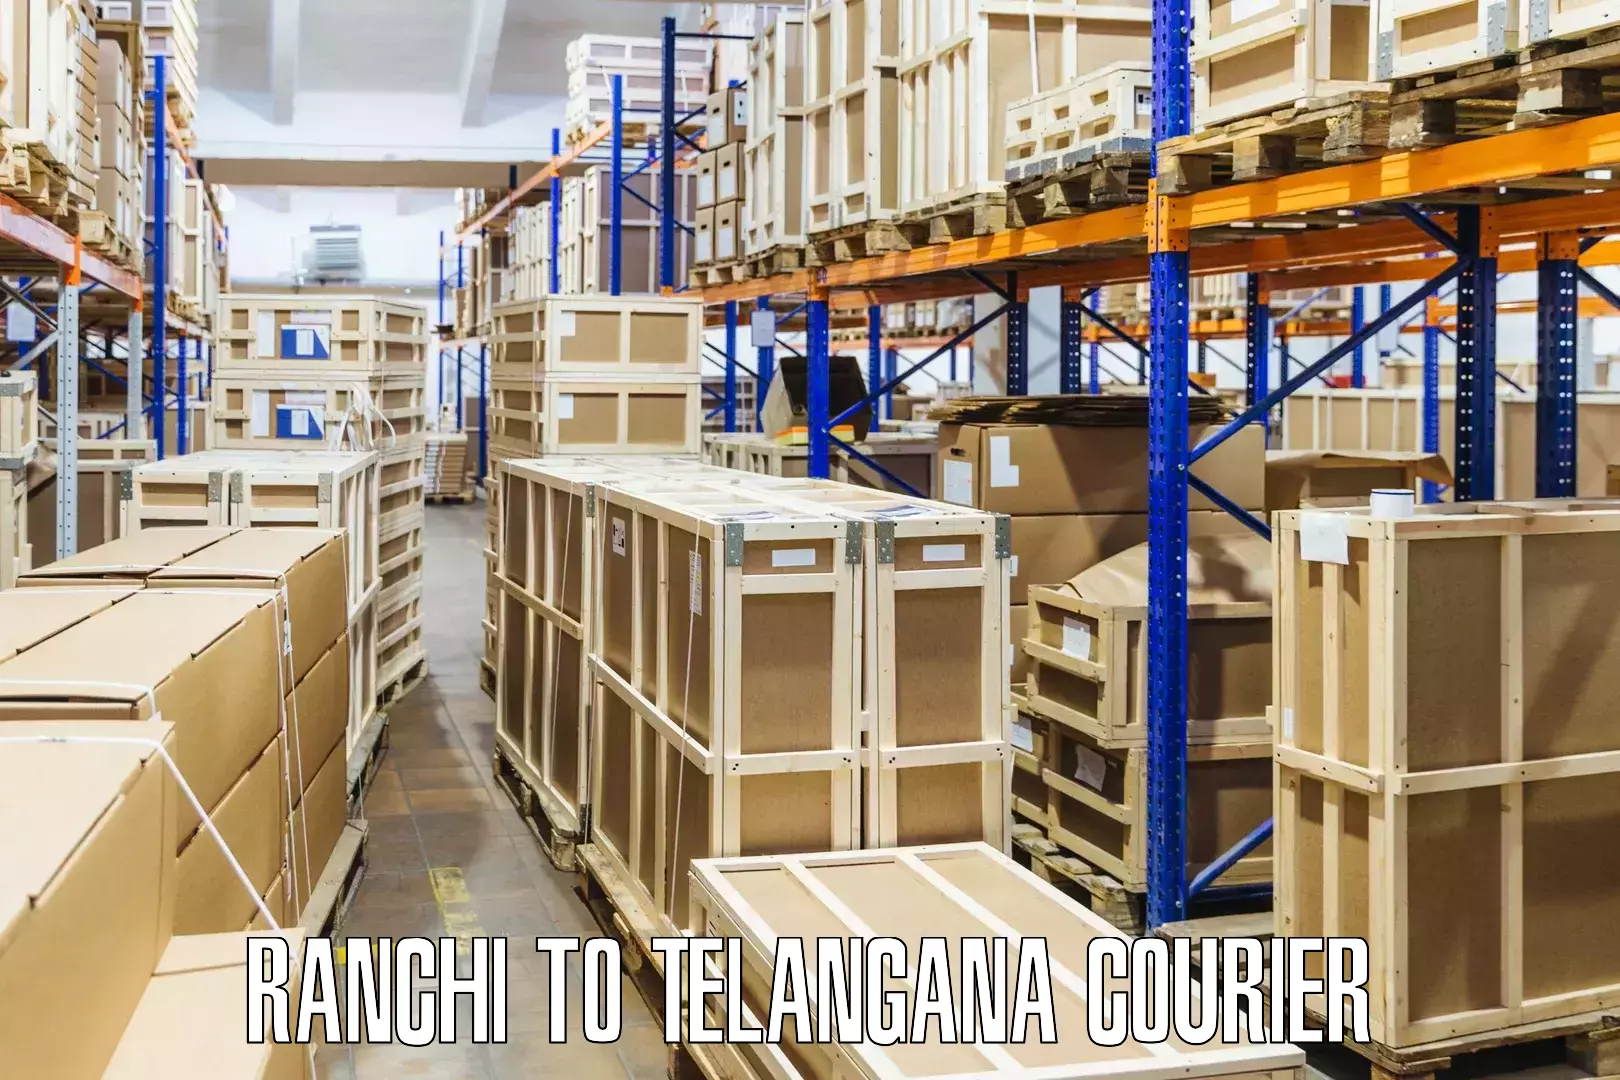 Courier service booking Ranchi to Telangana